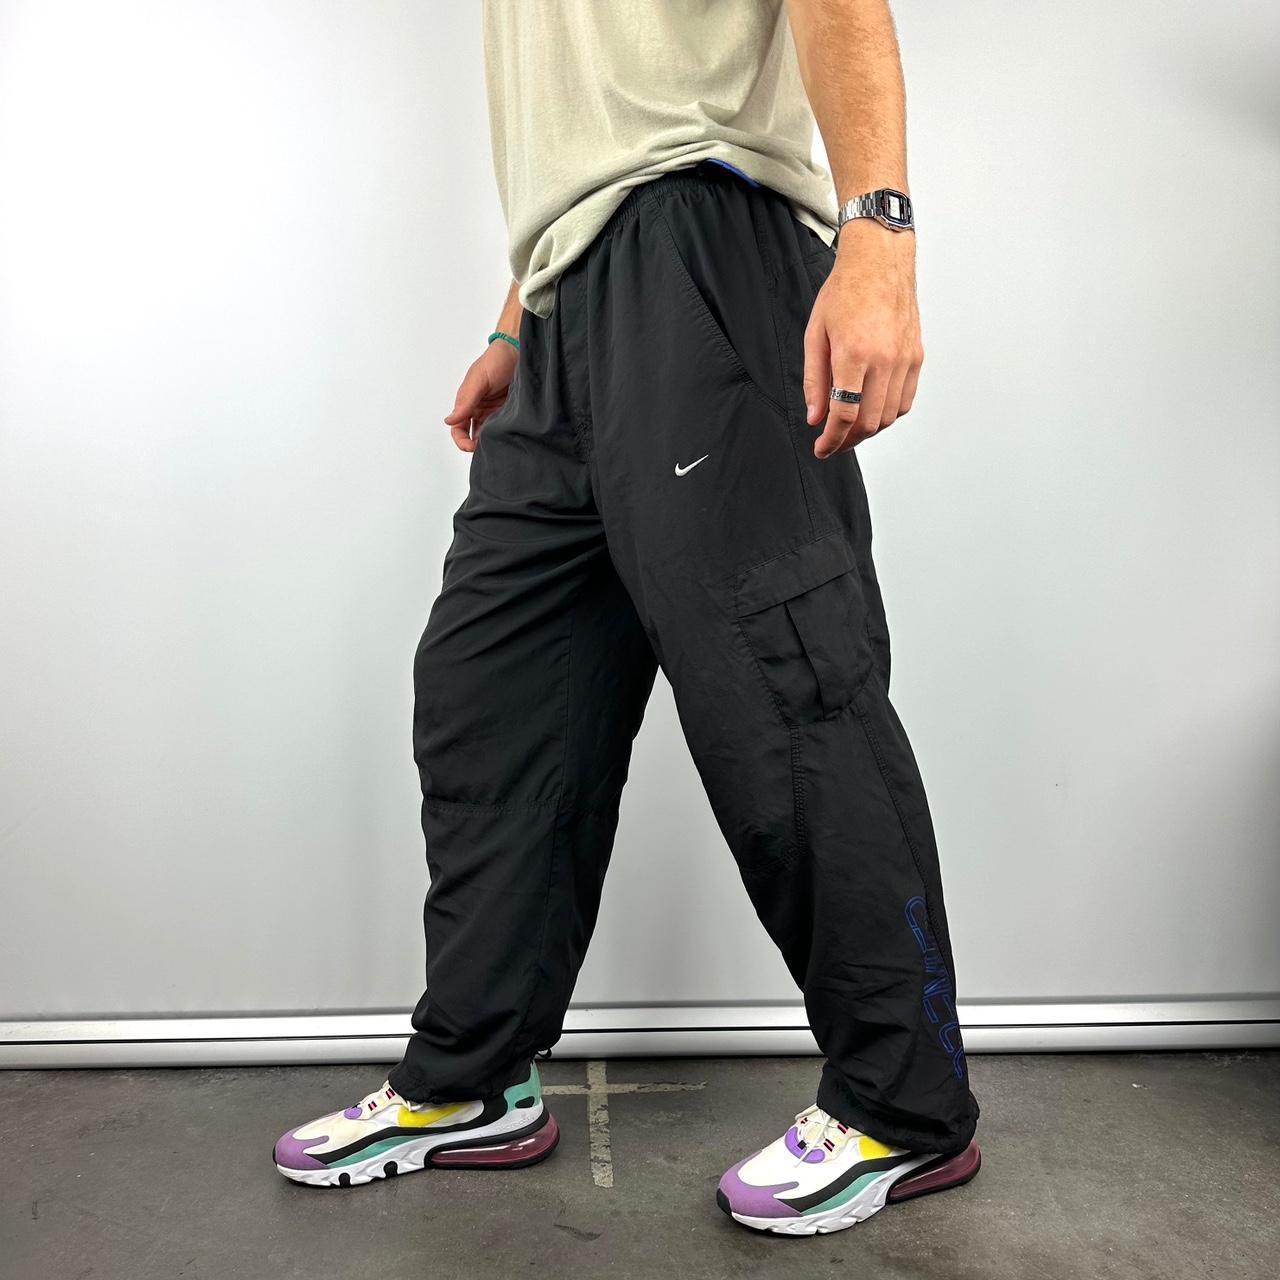 Nike flare joggers Stitched Nike Embroidery down - Depop